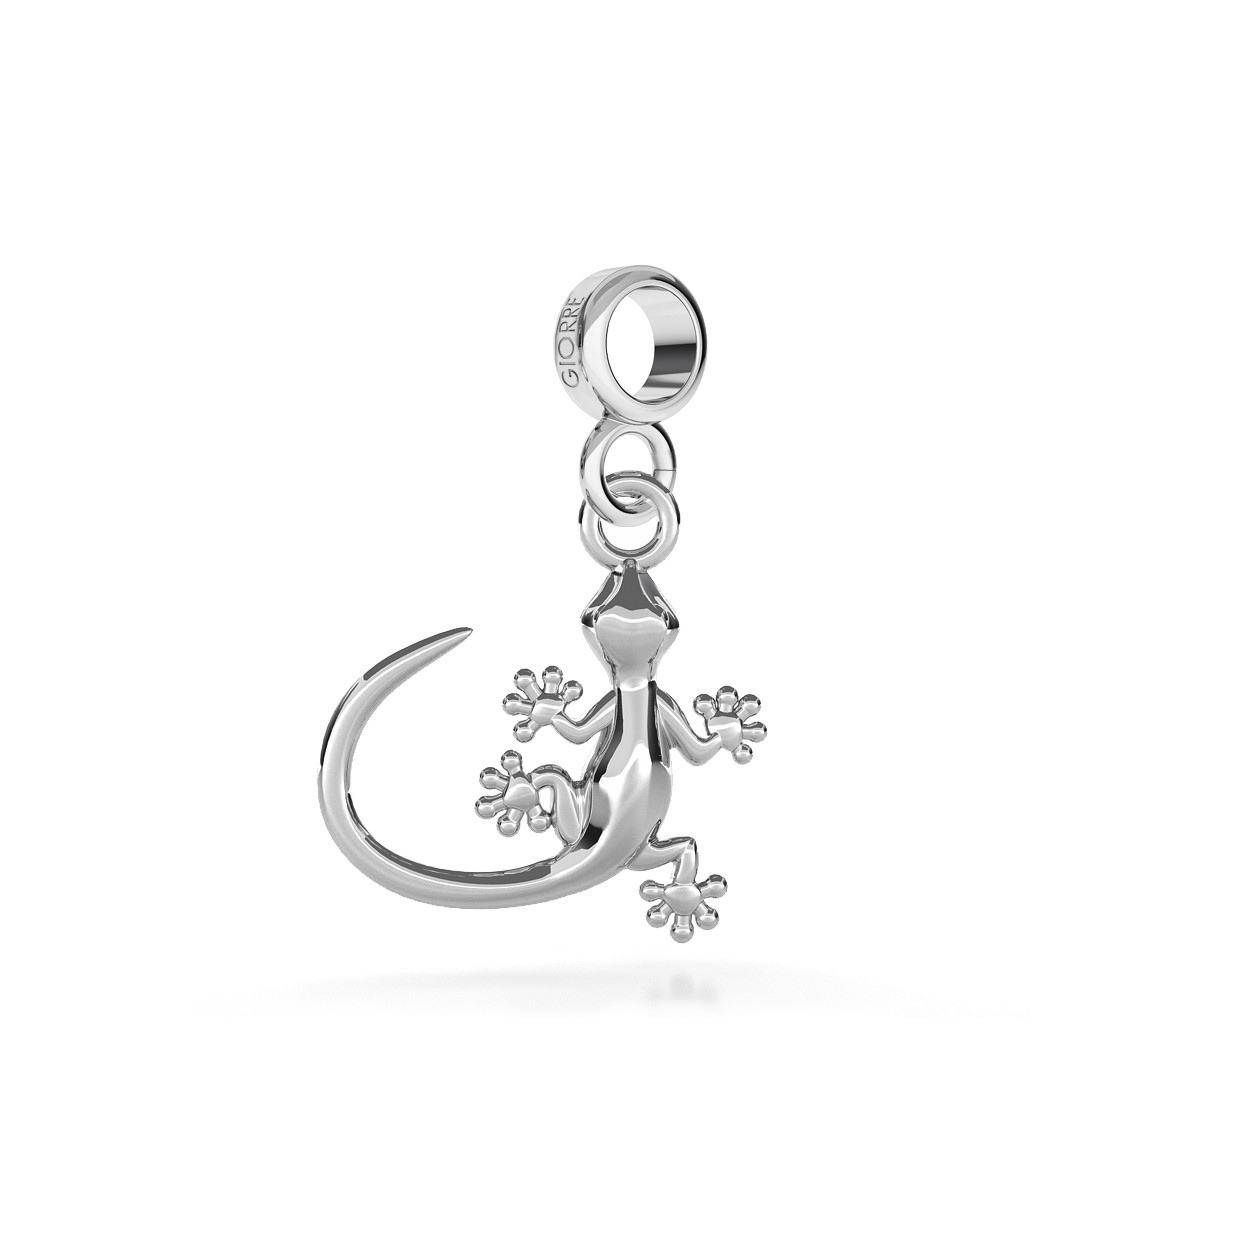 CHARM 21, LIZARD, SILVER 925,  RHODIUM OR GOLD PLATED